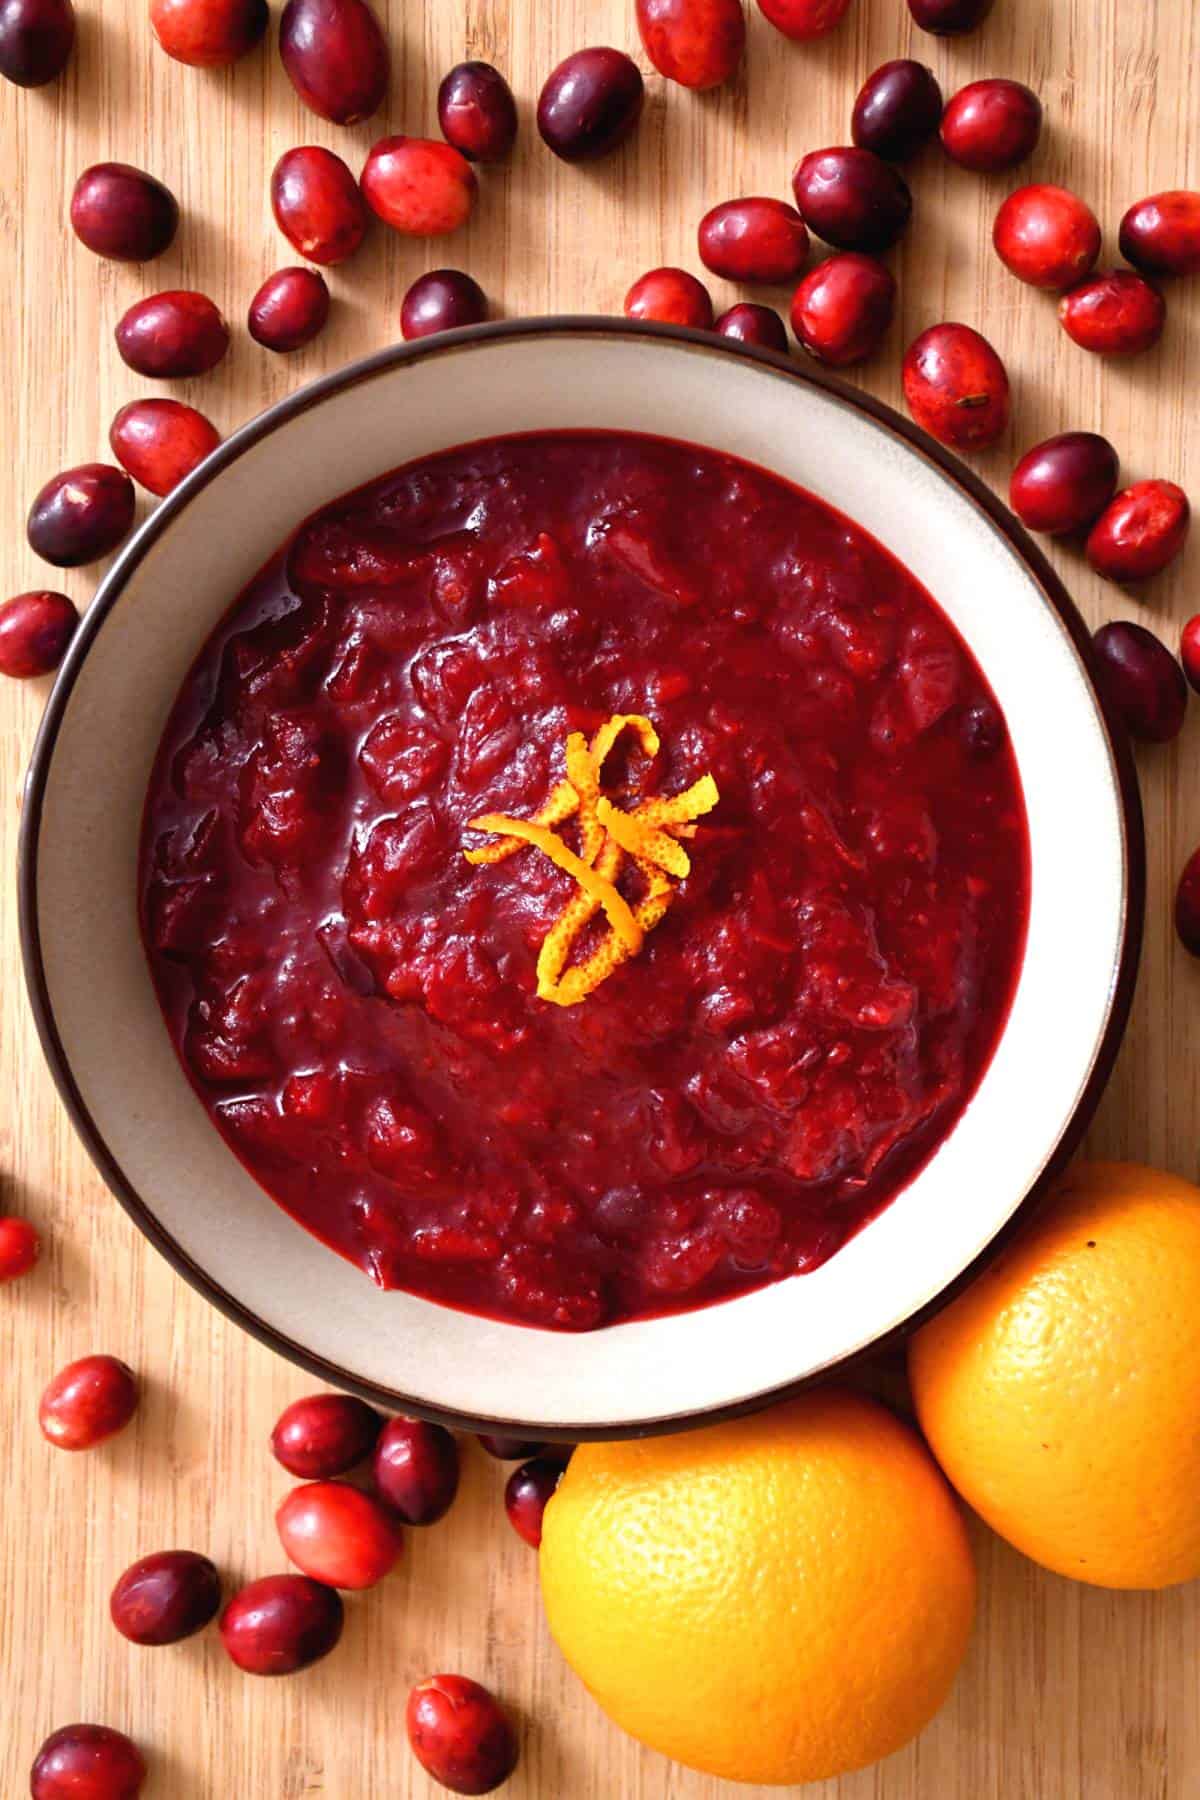 Cranberry sauce made with fresh cranberries and orange.